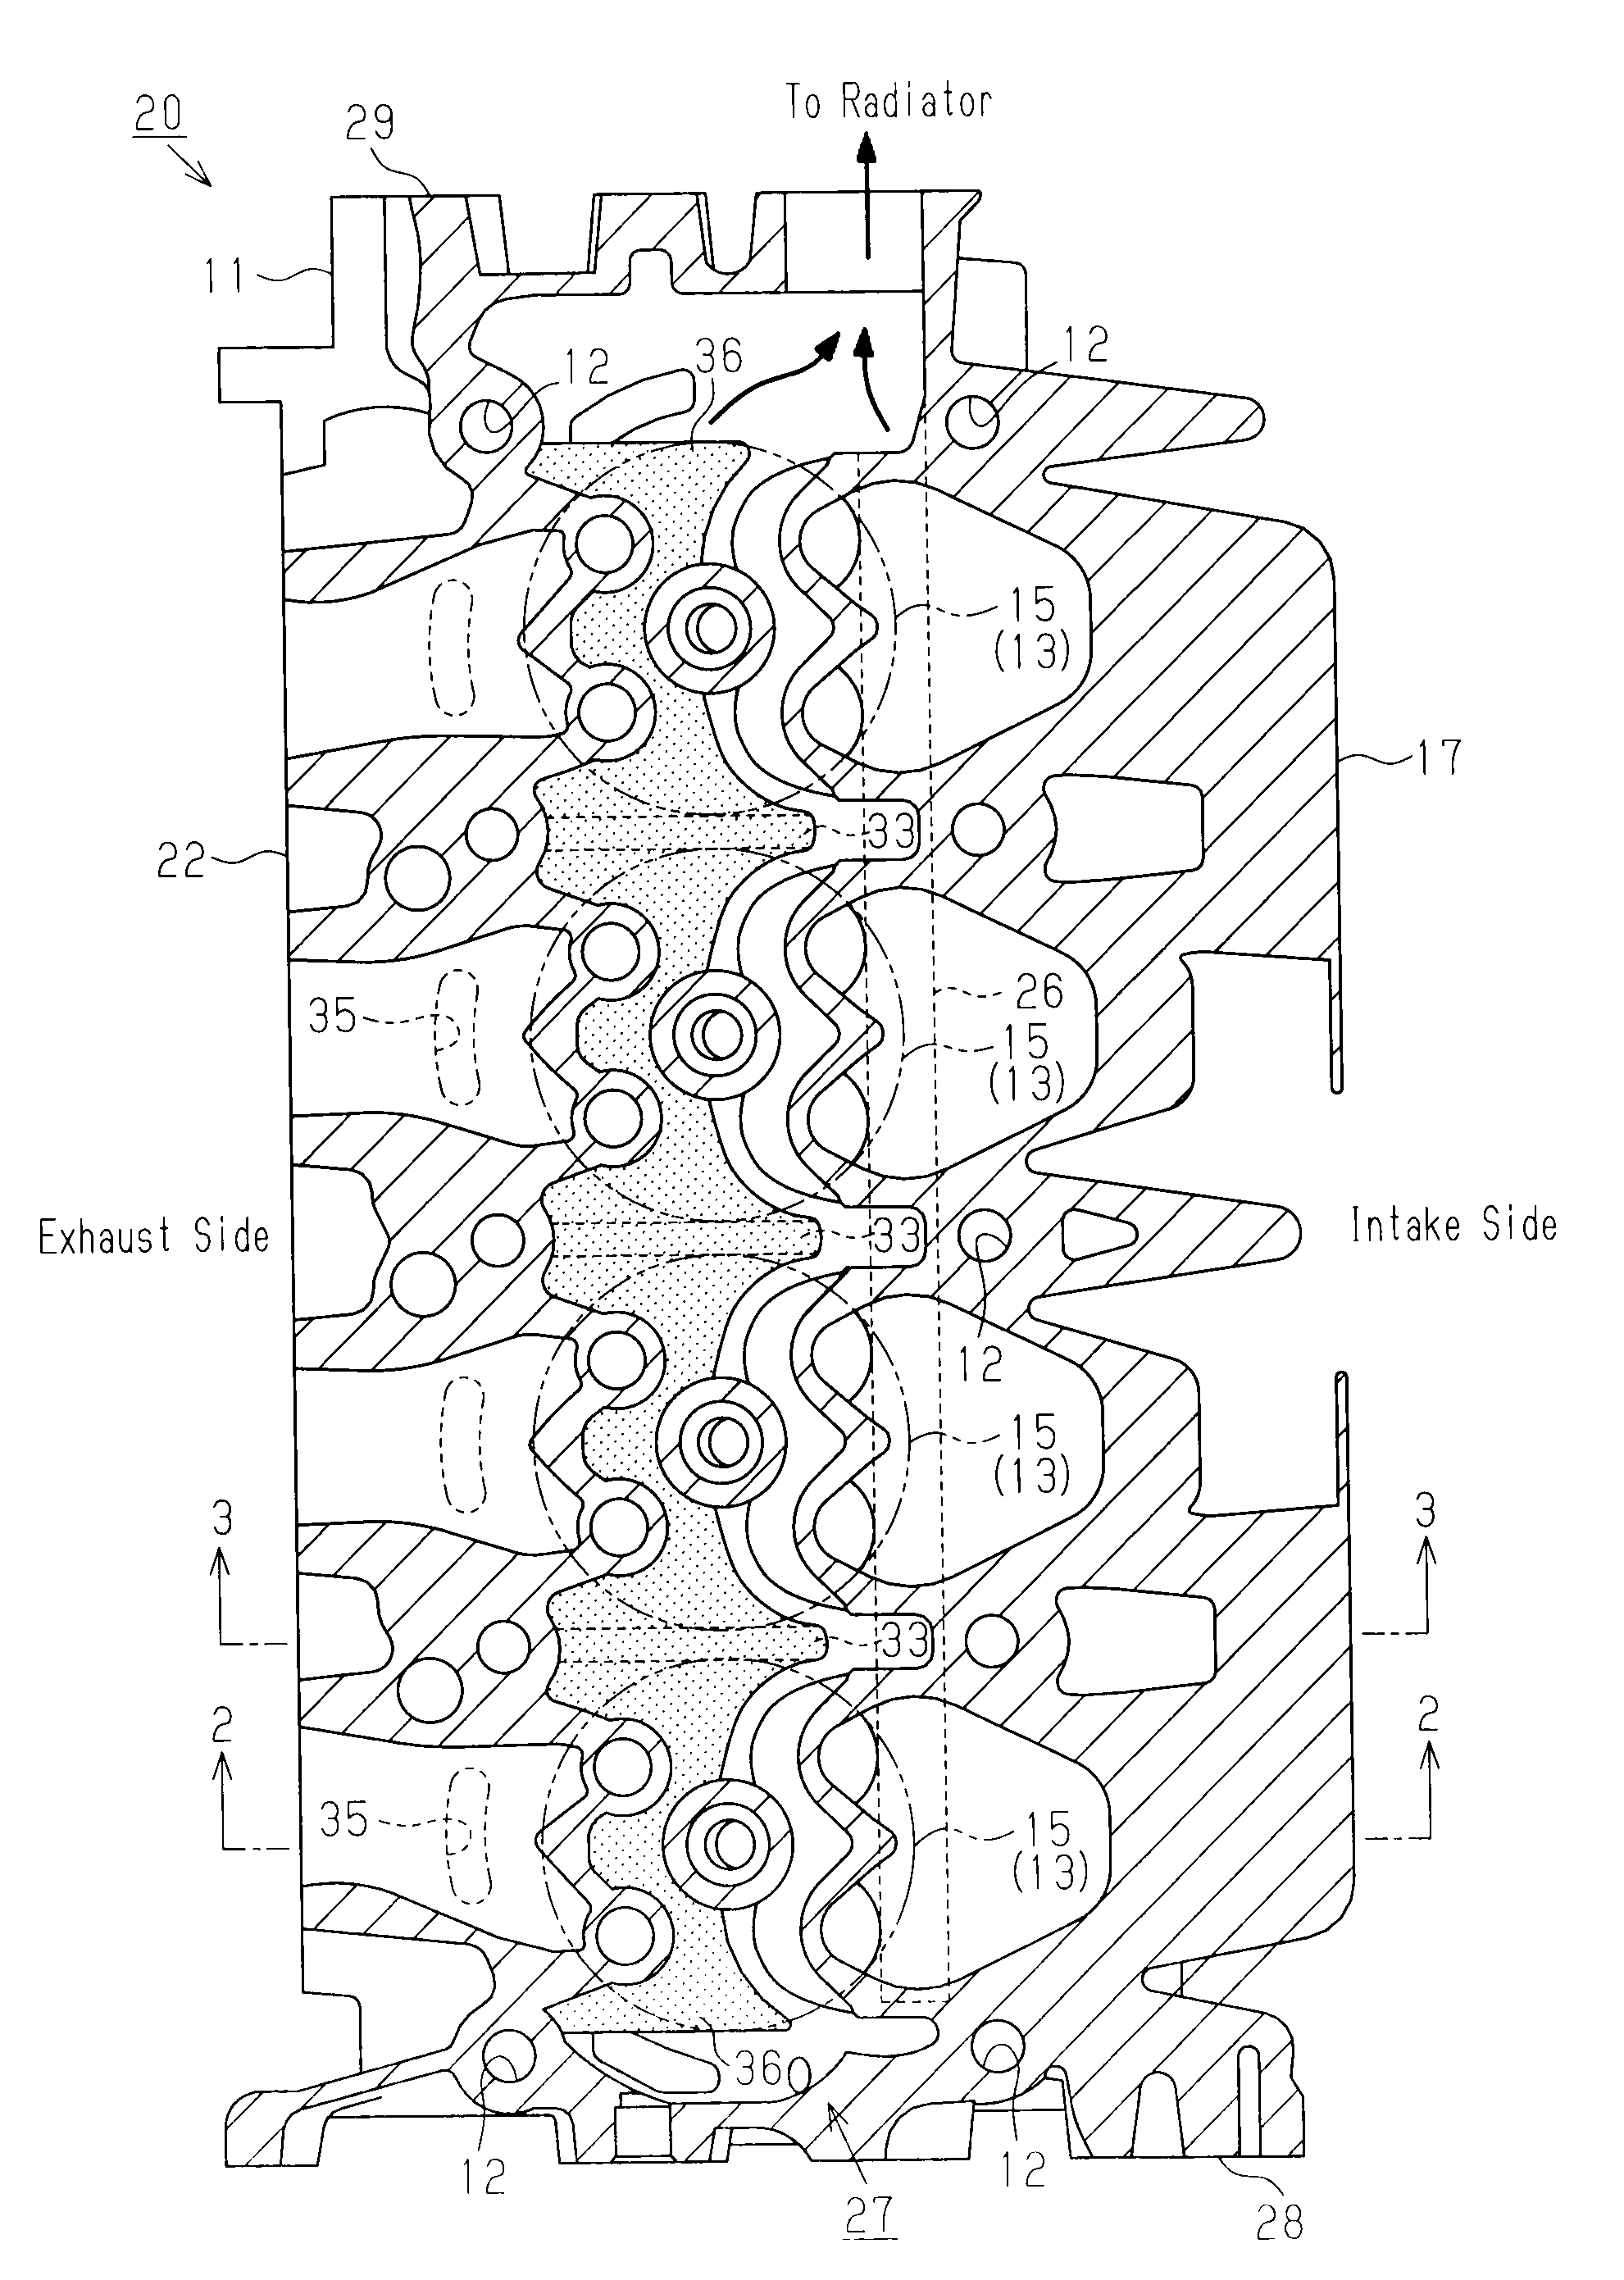 Cooling structure of cylinder head